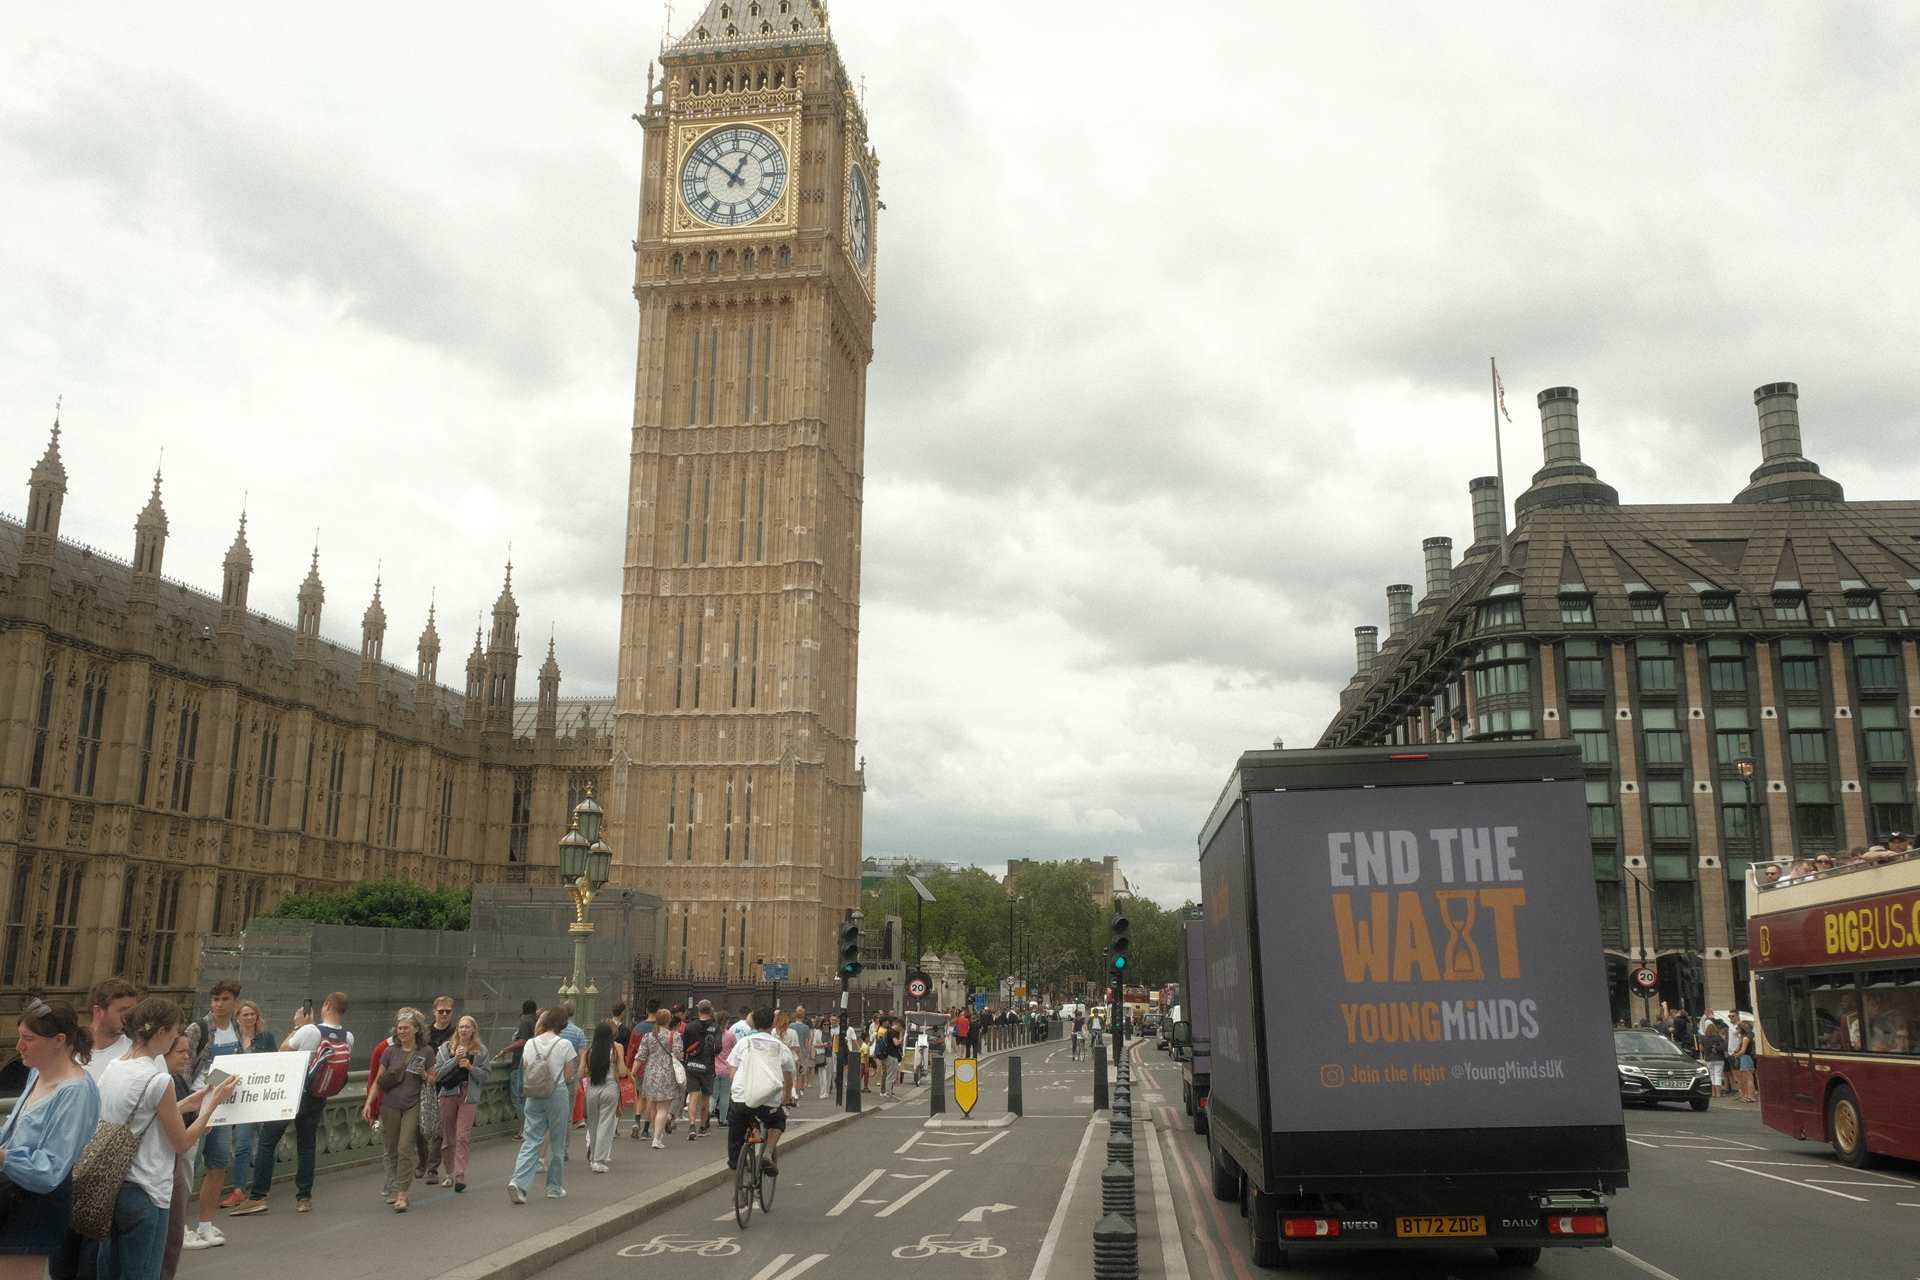 A van driving around Parliament with a sign reading: "End The Wait".